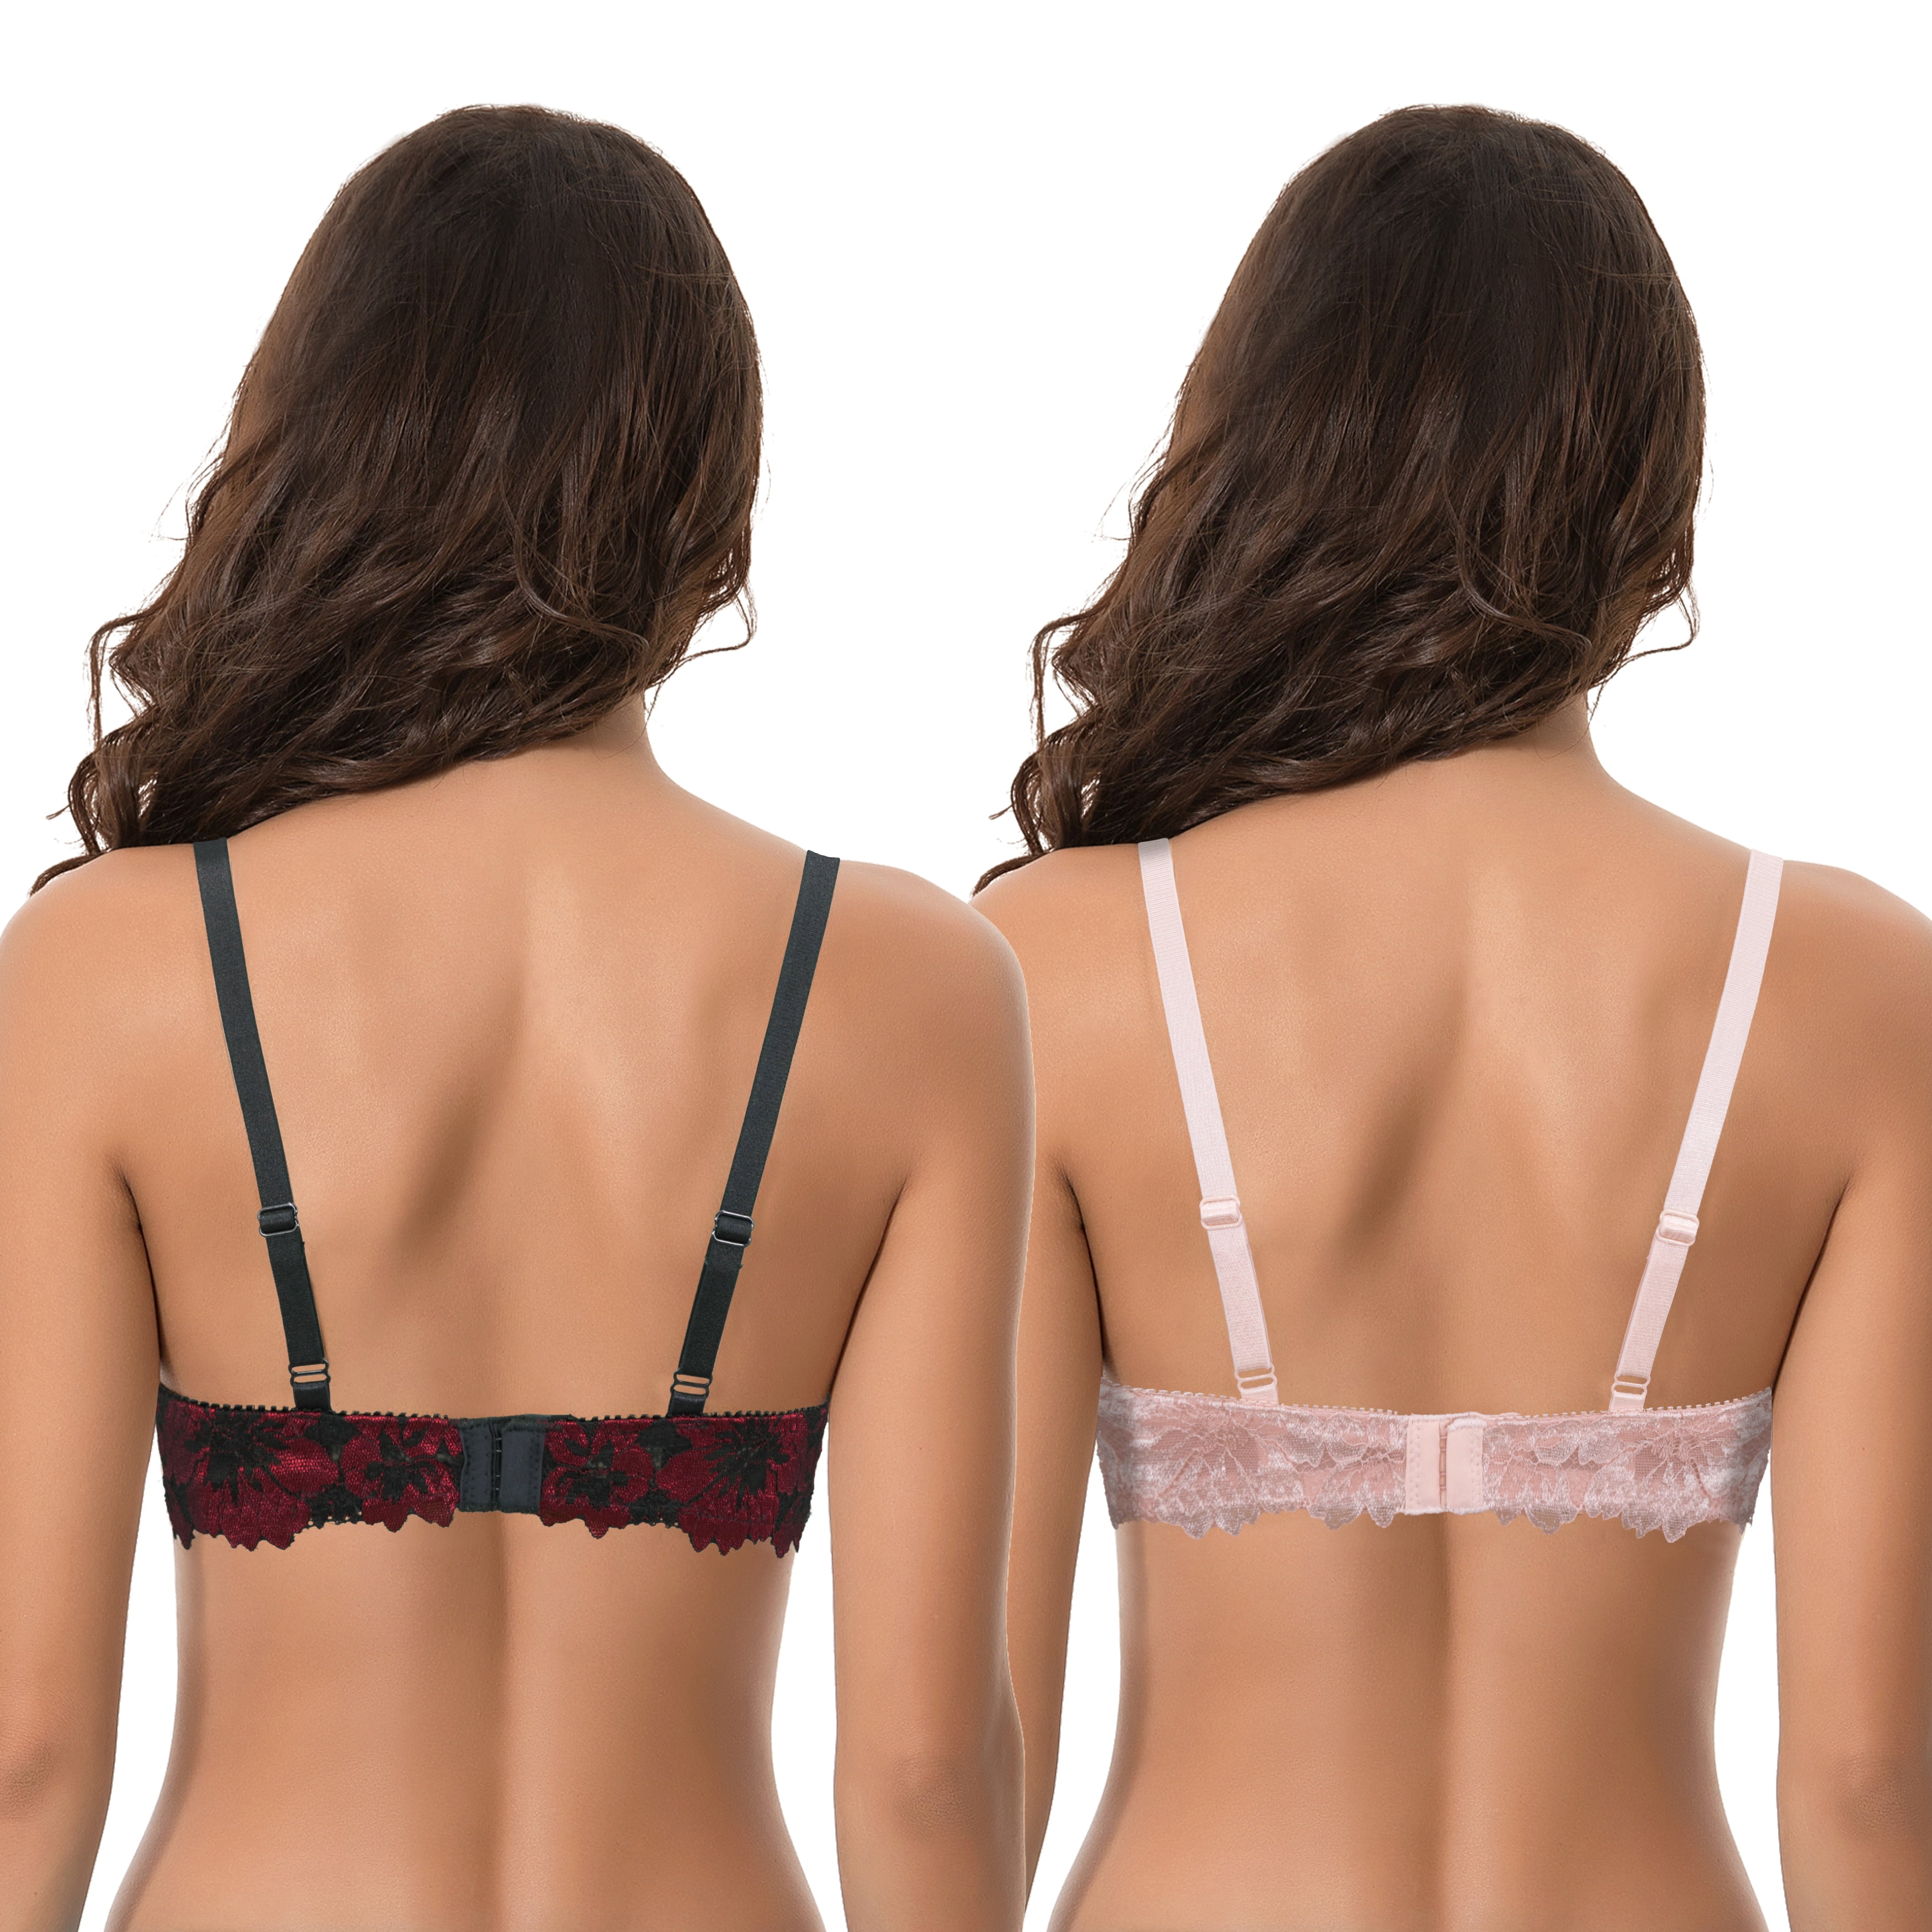 Curve Muse Women's Plus Size Push Up Add 1 Cup Underwire Perfect Shape Lace  Bras-2Pk-Black/Red,Apricot Pink-32C 